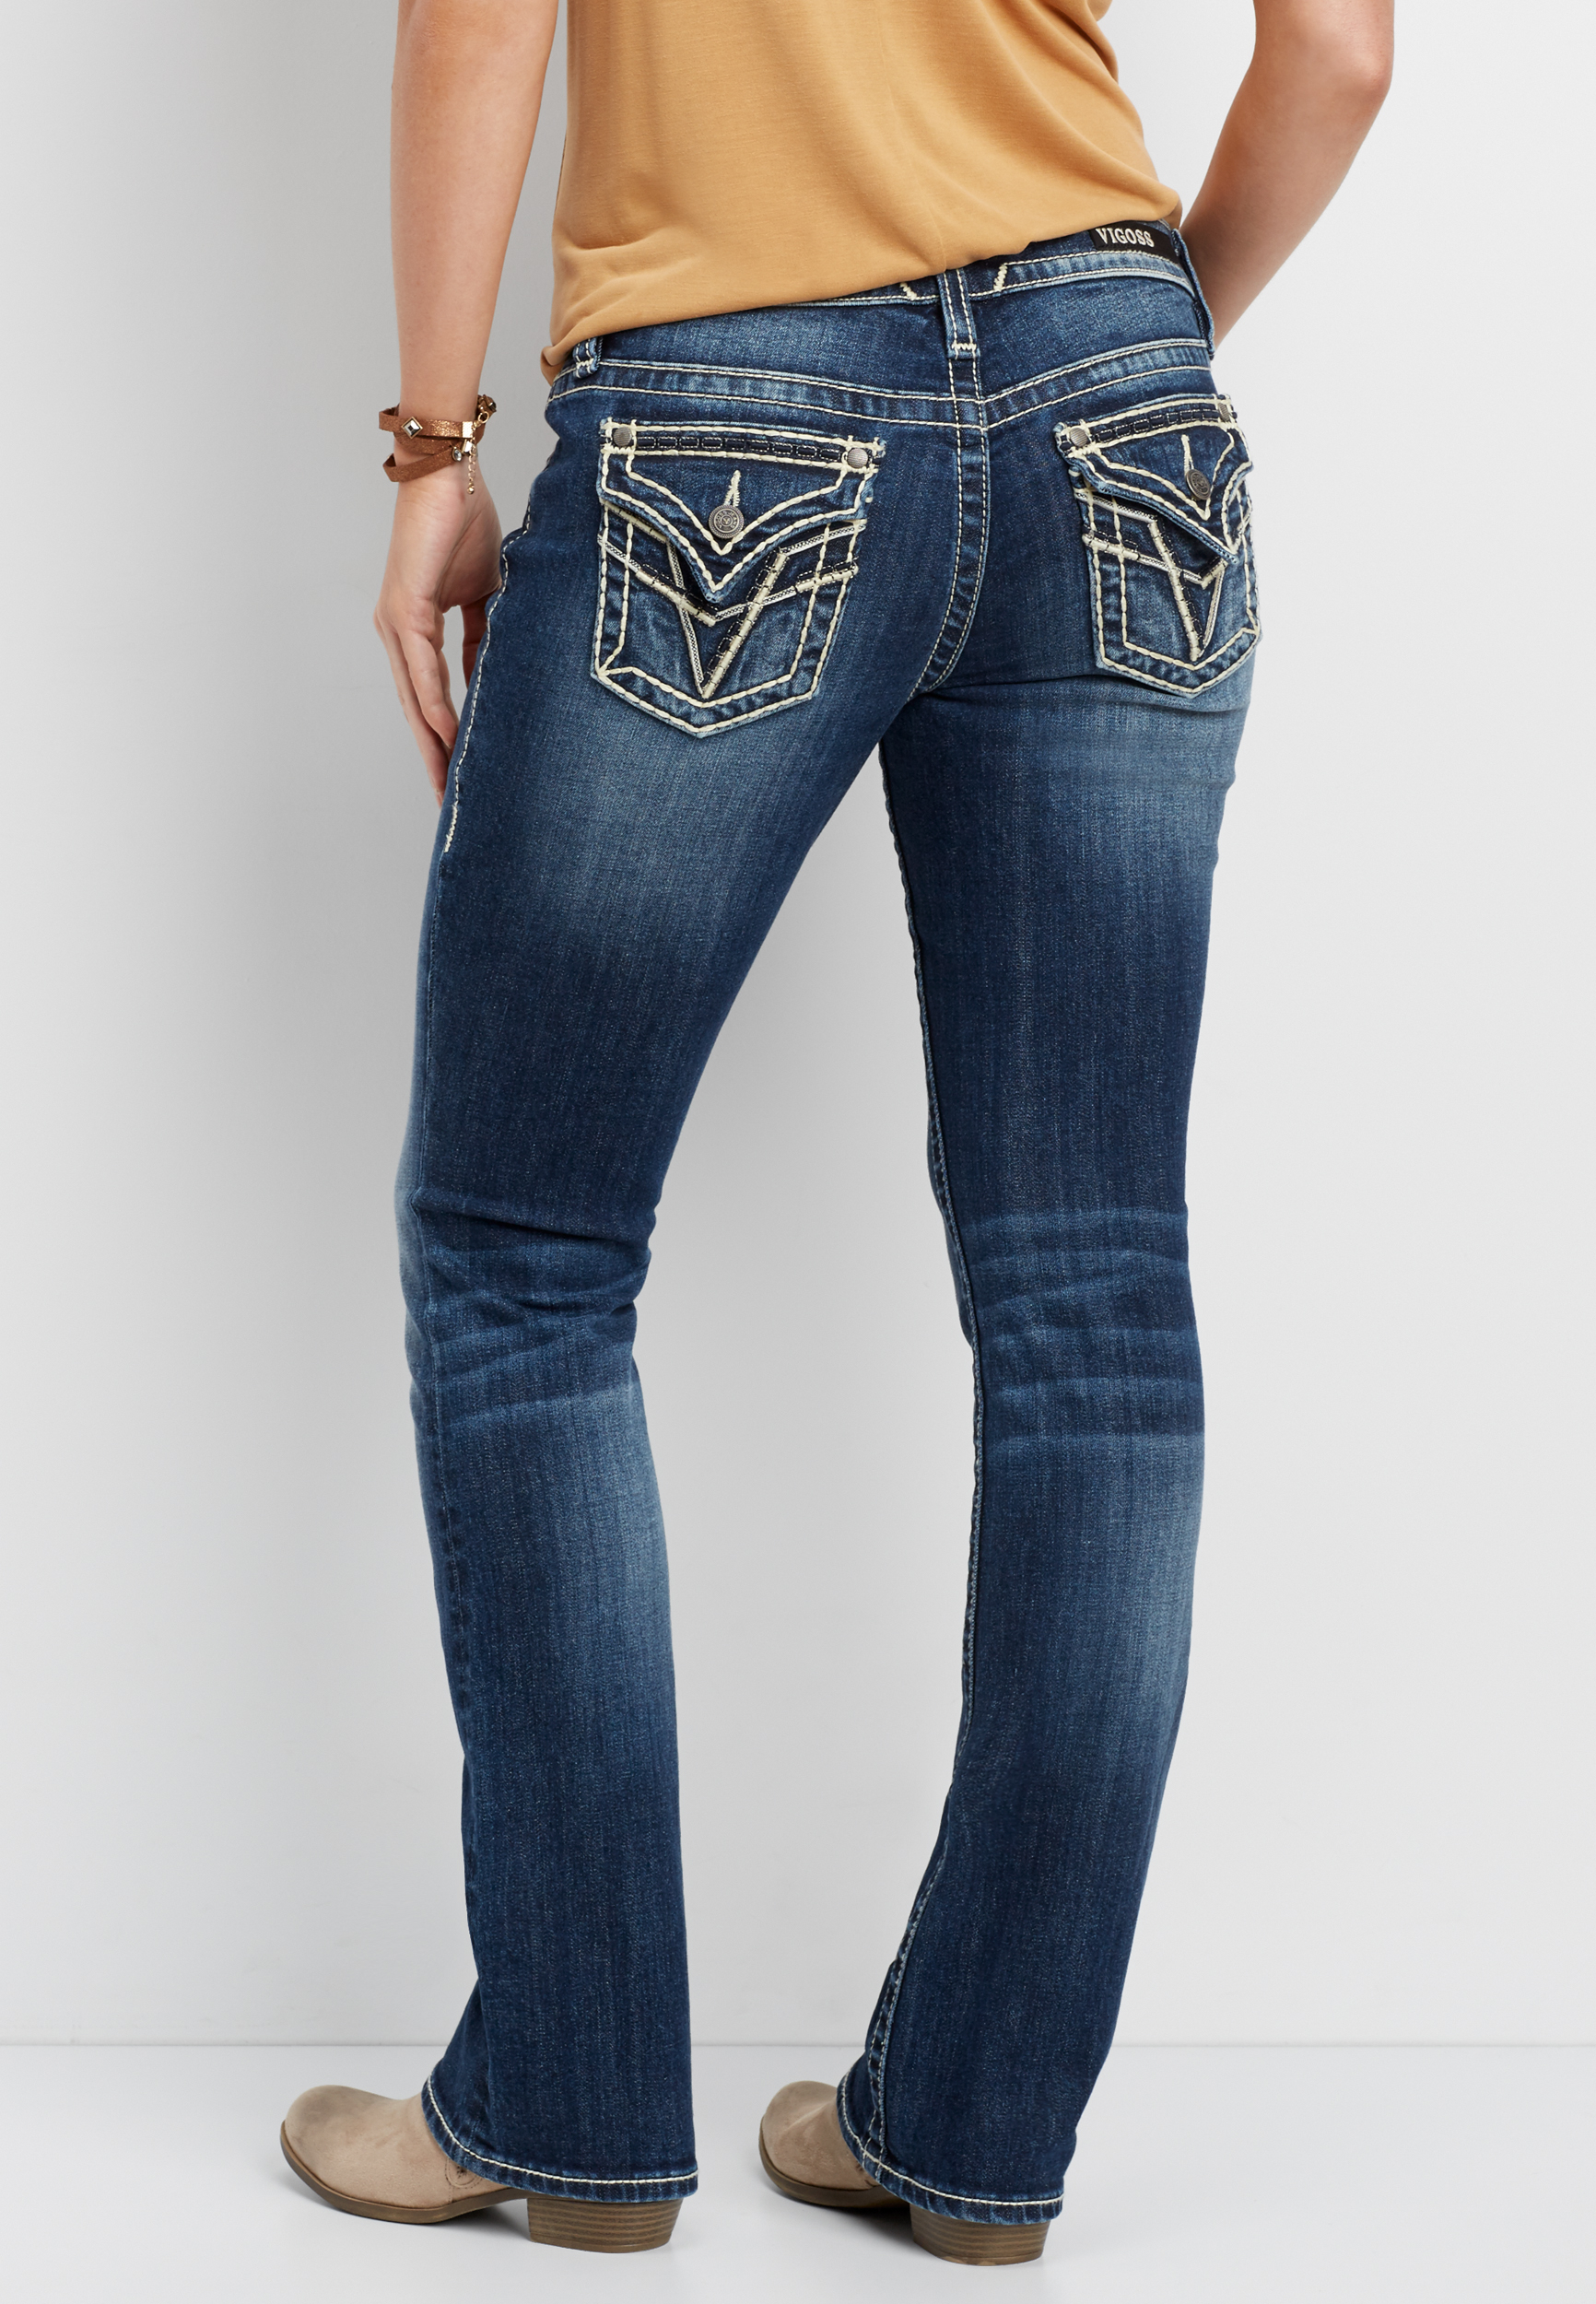 Vigoss® dark wash bootcut jeans with back flap pockets | maurices